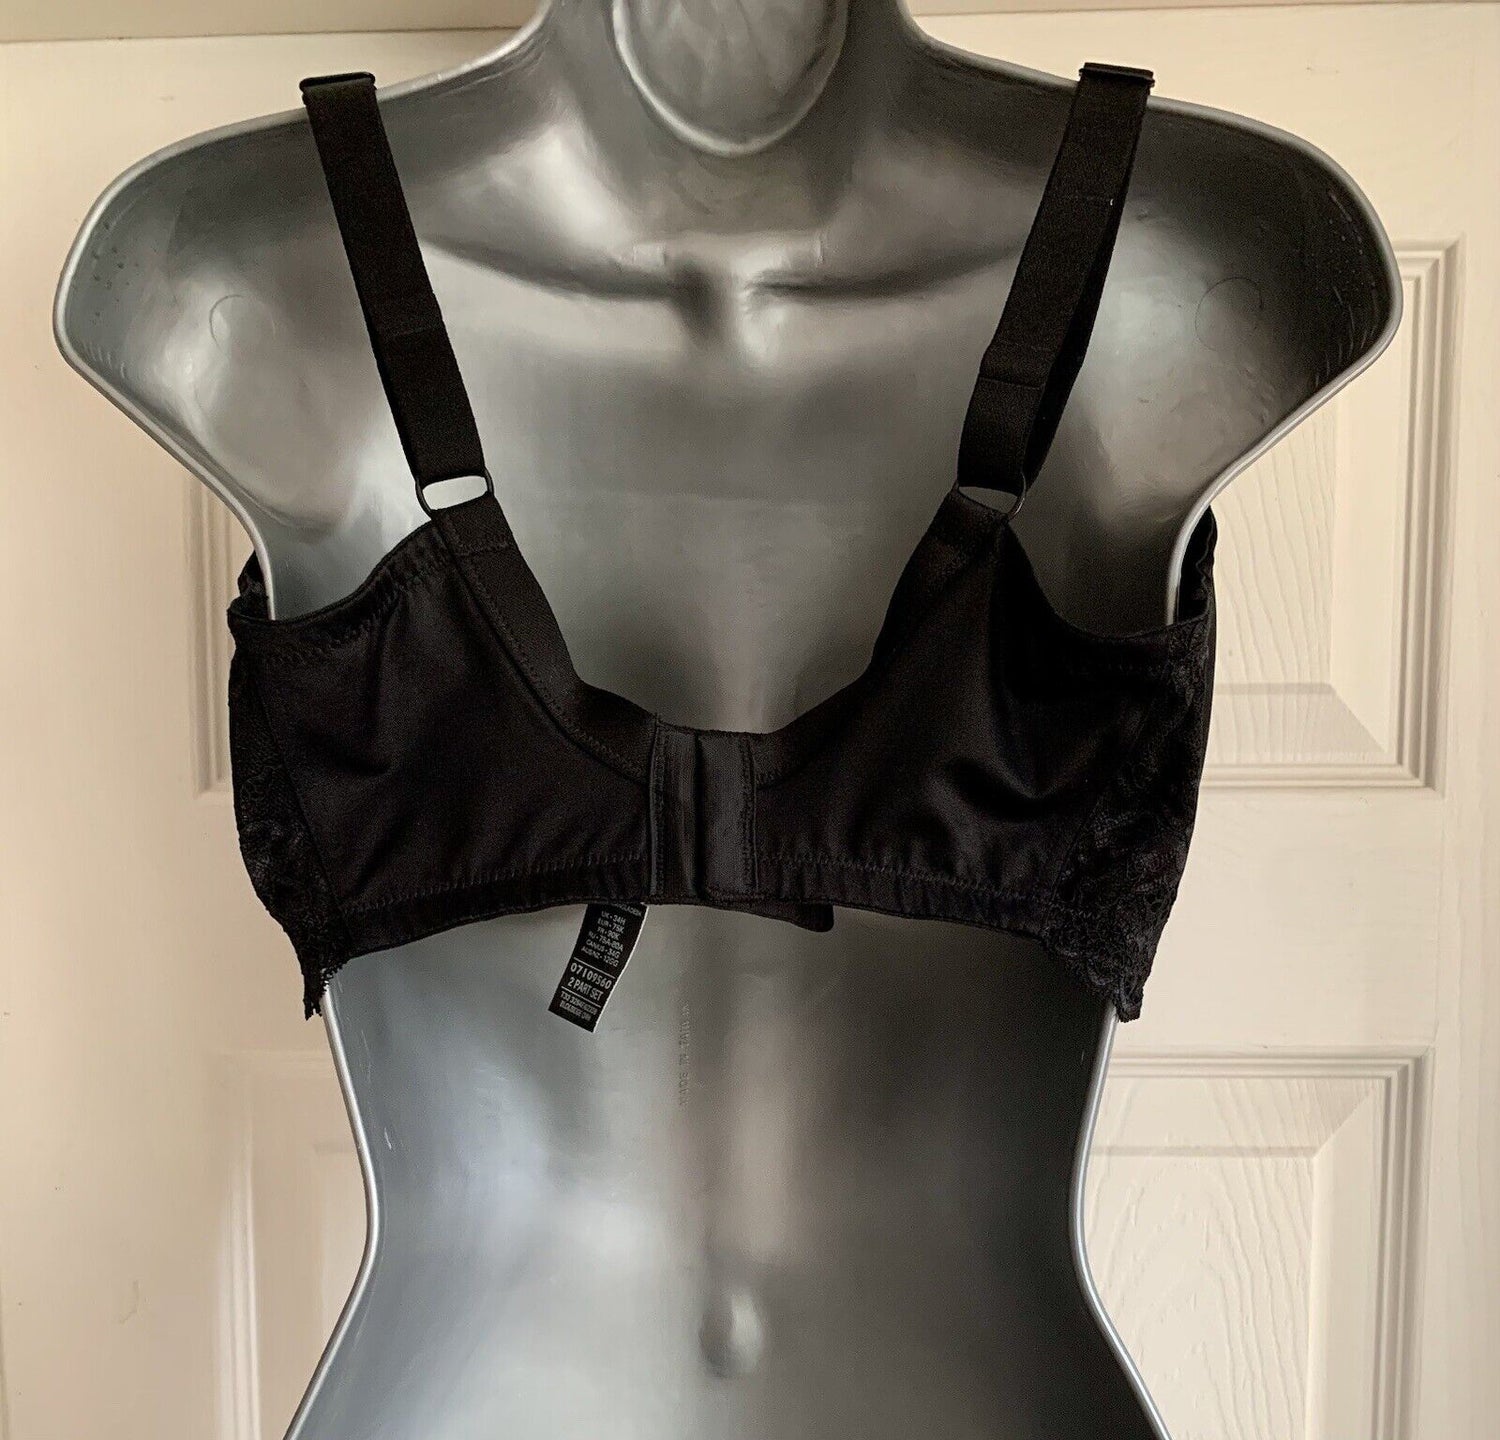 NEW EX M&S BLACK All-over Lace Non-Padded Full Cup Bra - Size 34 B